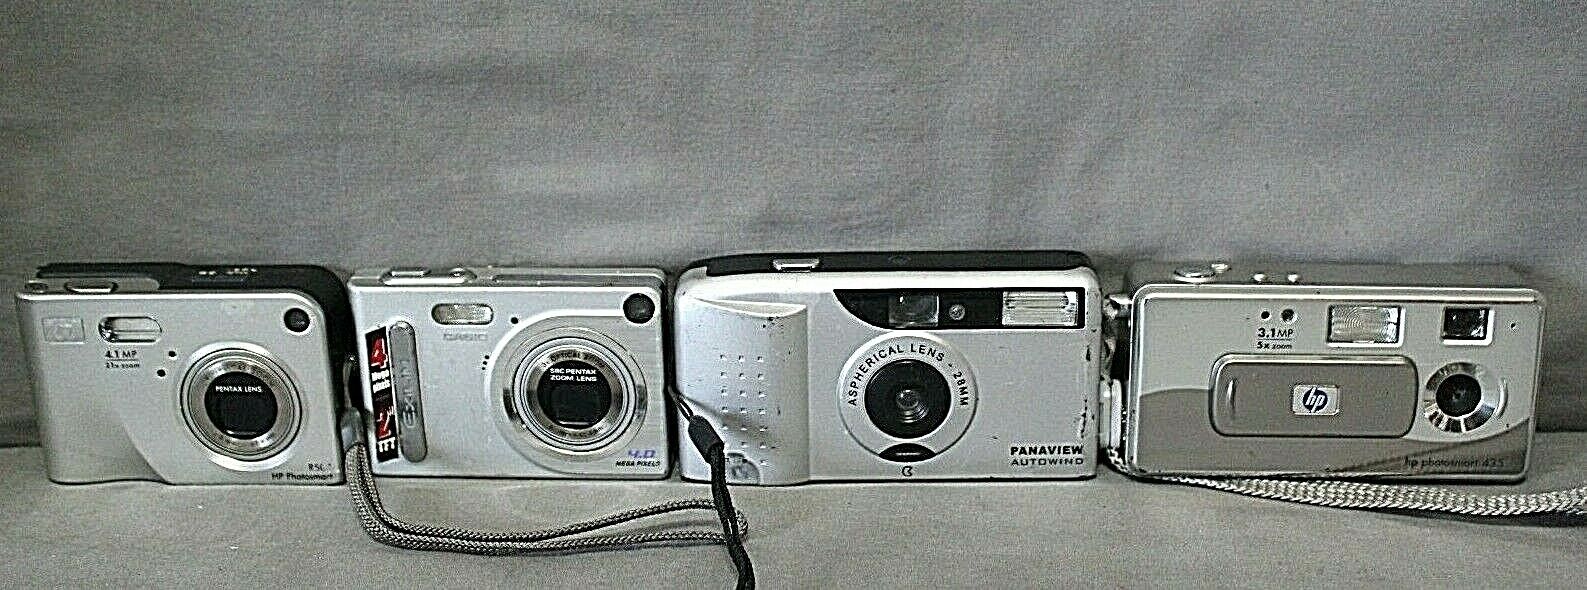 CAMERAS lot of 4 With 2 HP Photosmart-Casio EX-Z4U-Panaview Auto wind  HP, Casio & Panaview does not apply